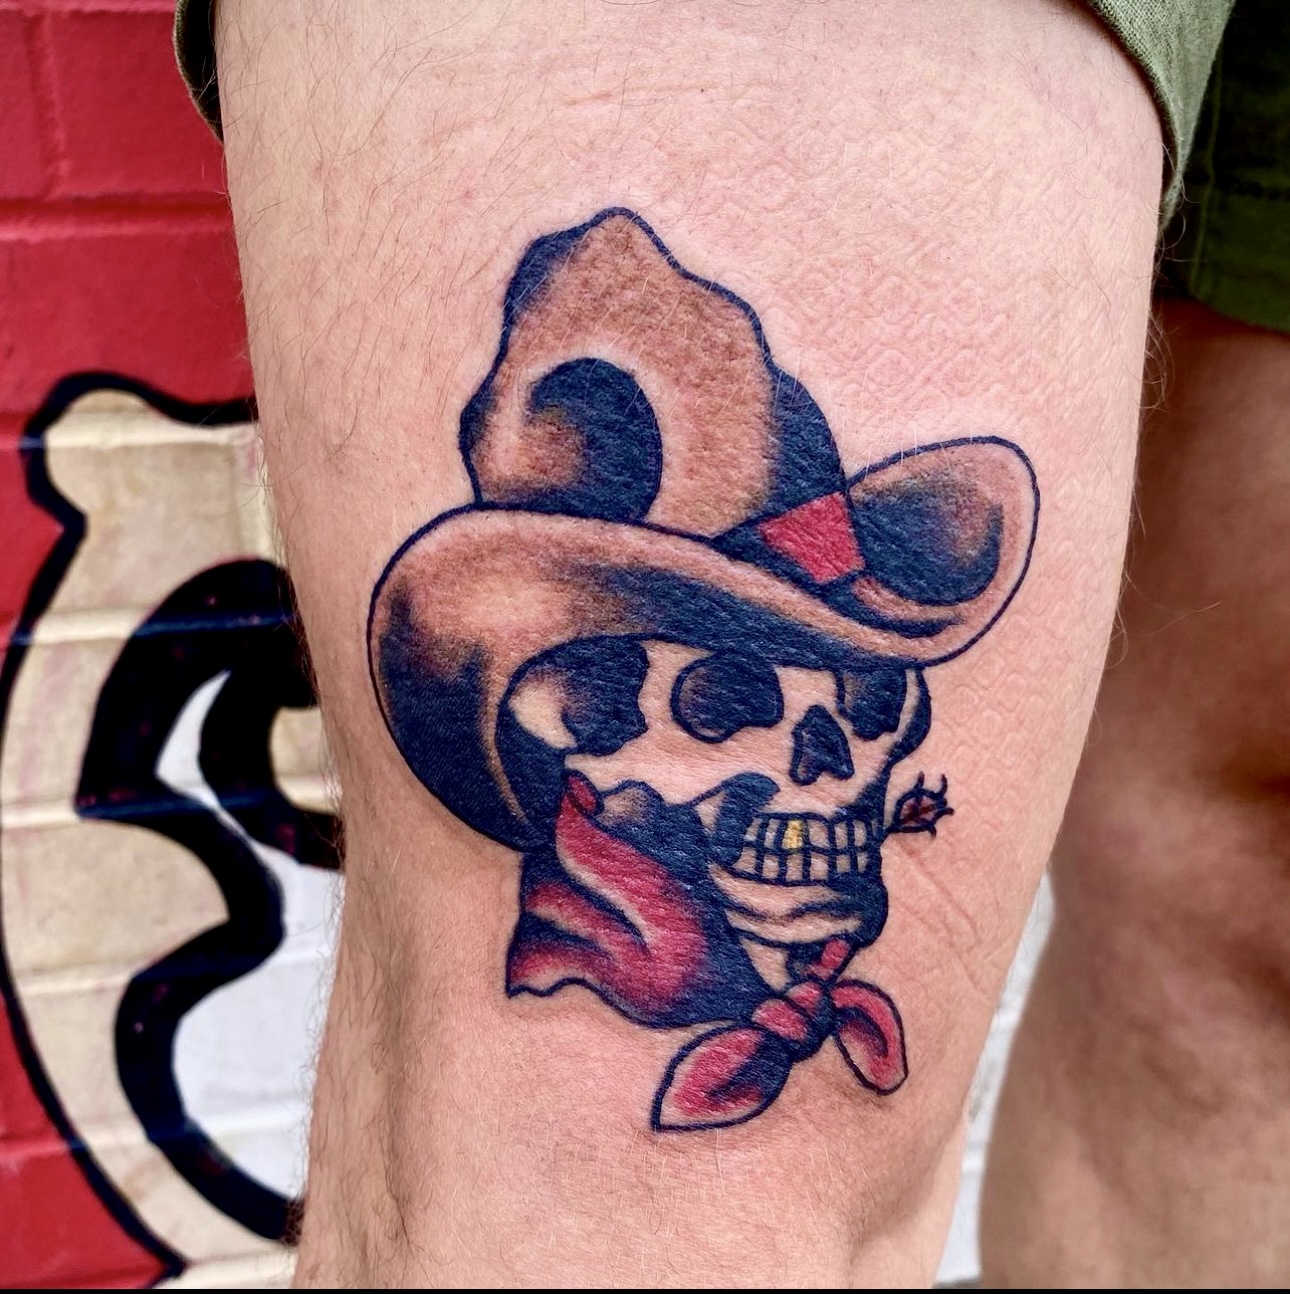 Tattooo of a skull with a cowboy hat on it